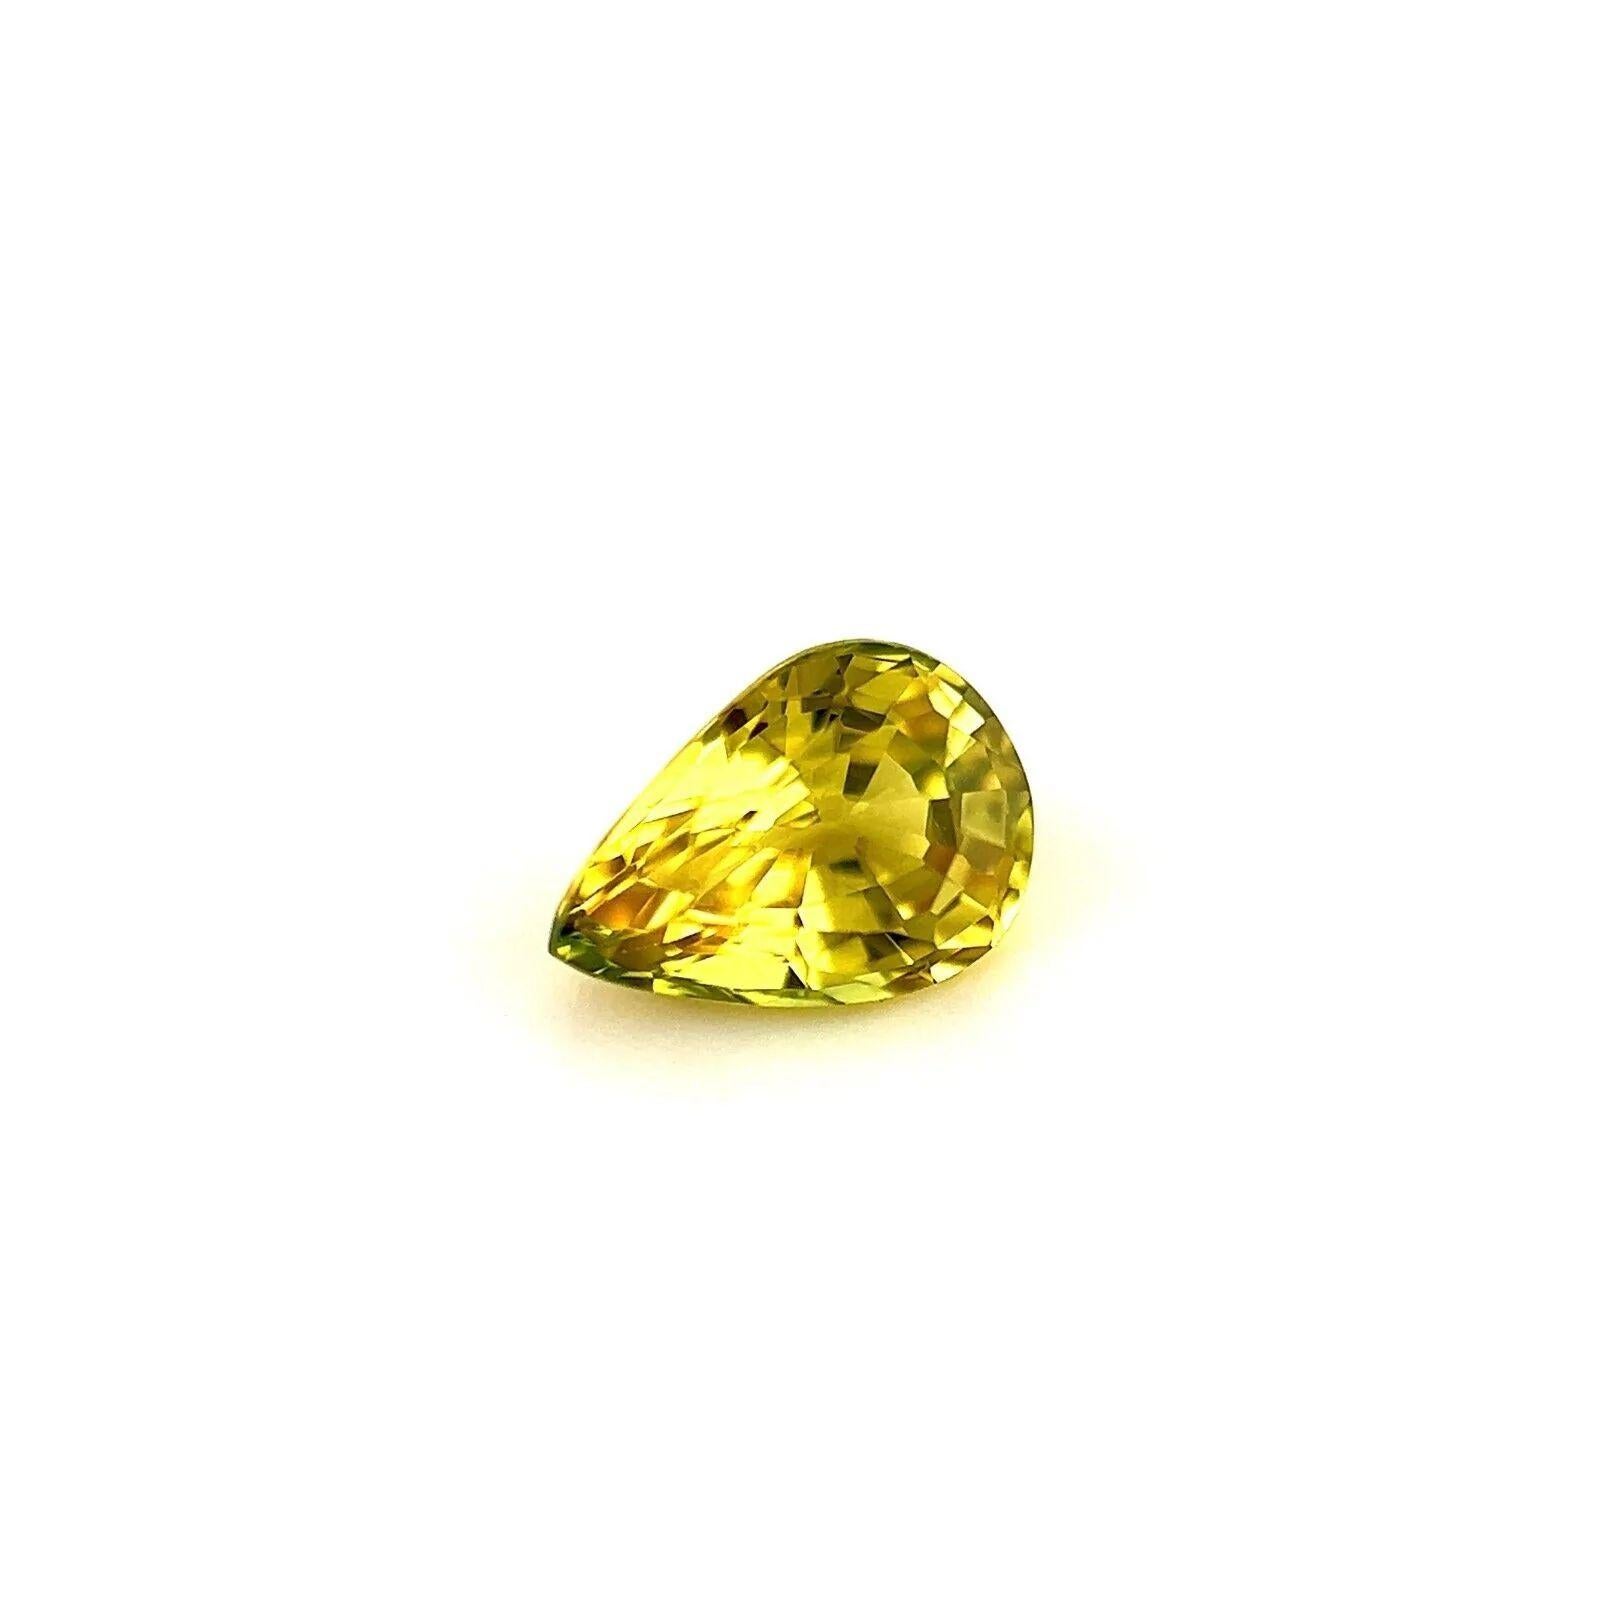 Fine Australian Natural Sapphire Vivid Yellow Pear Cut Gemstone 6.3x4.5mm VS

Natural Vivid Yellow Sapphire Gemstone.
0.67 Carat with a beautiful vivid yellow colour and an excellent pear teardrop cut.
Also has good clarity, some small natural